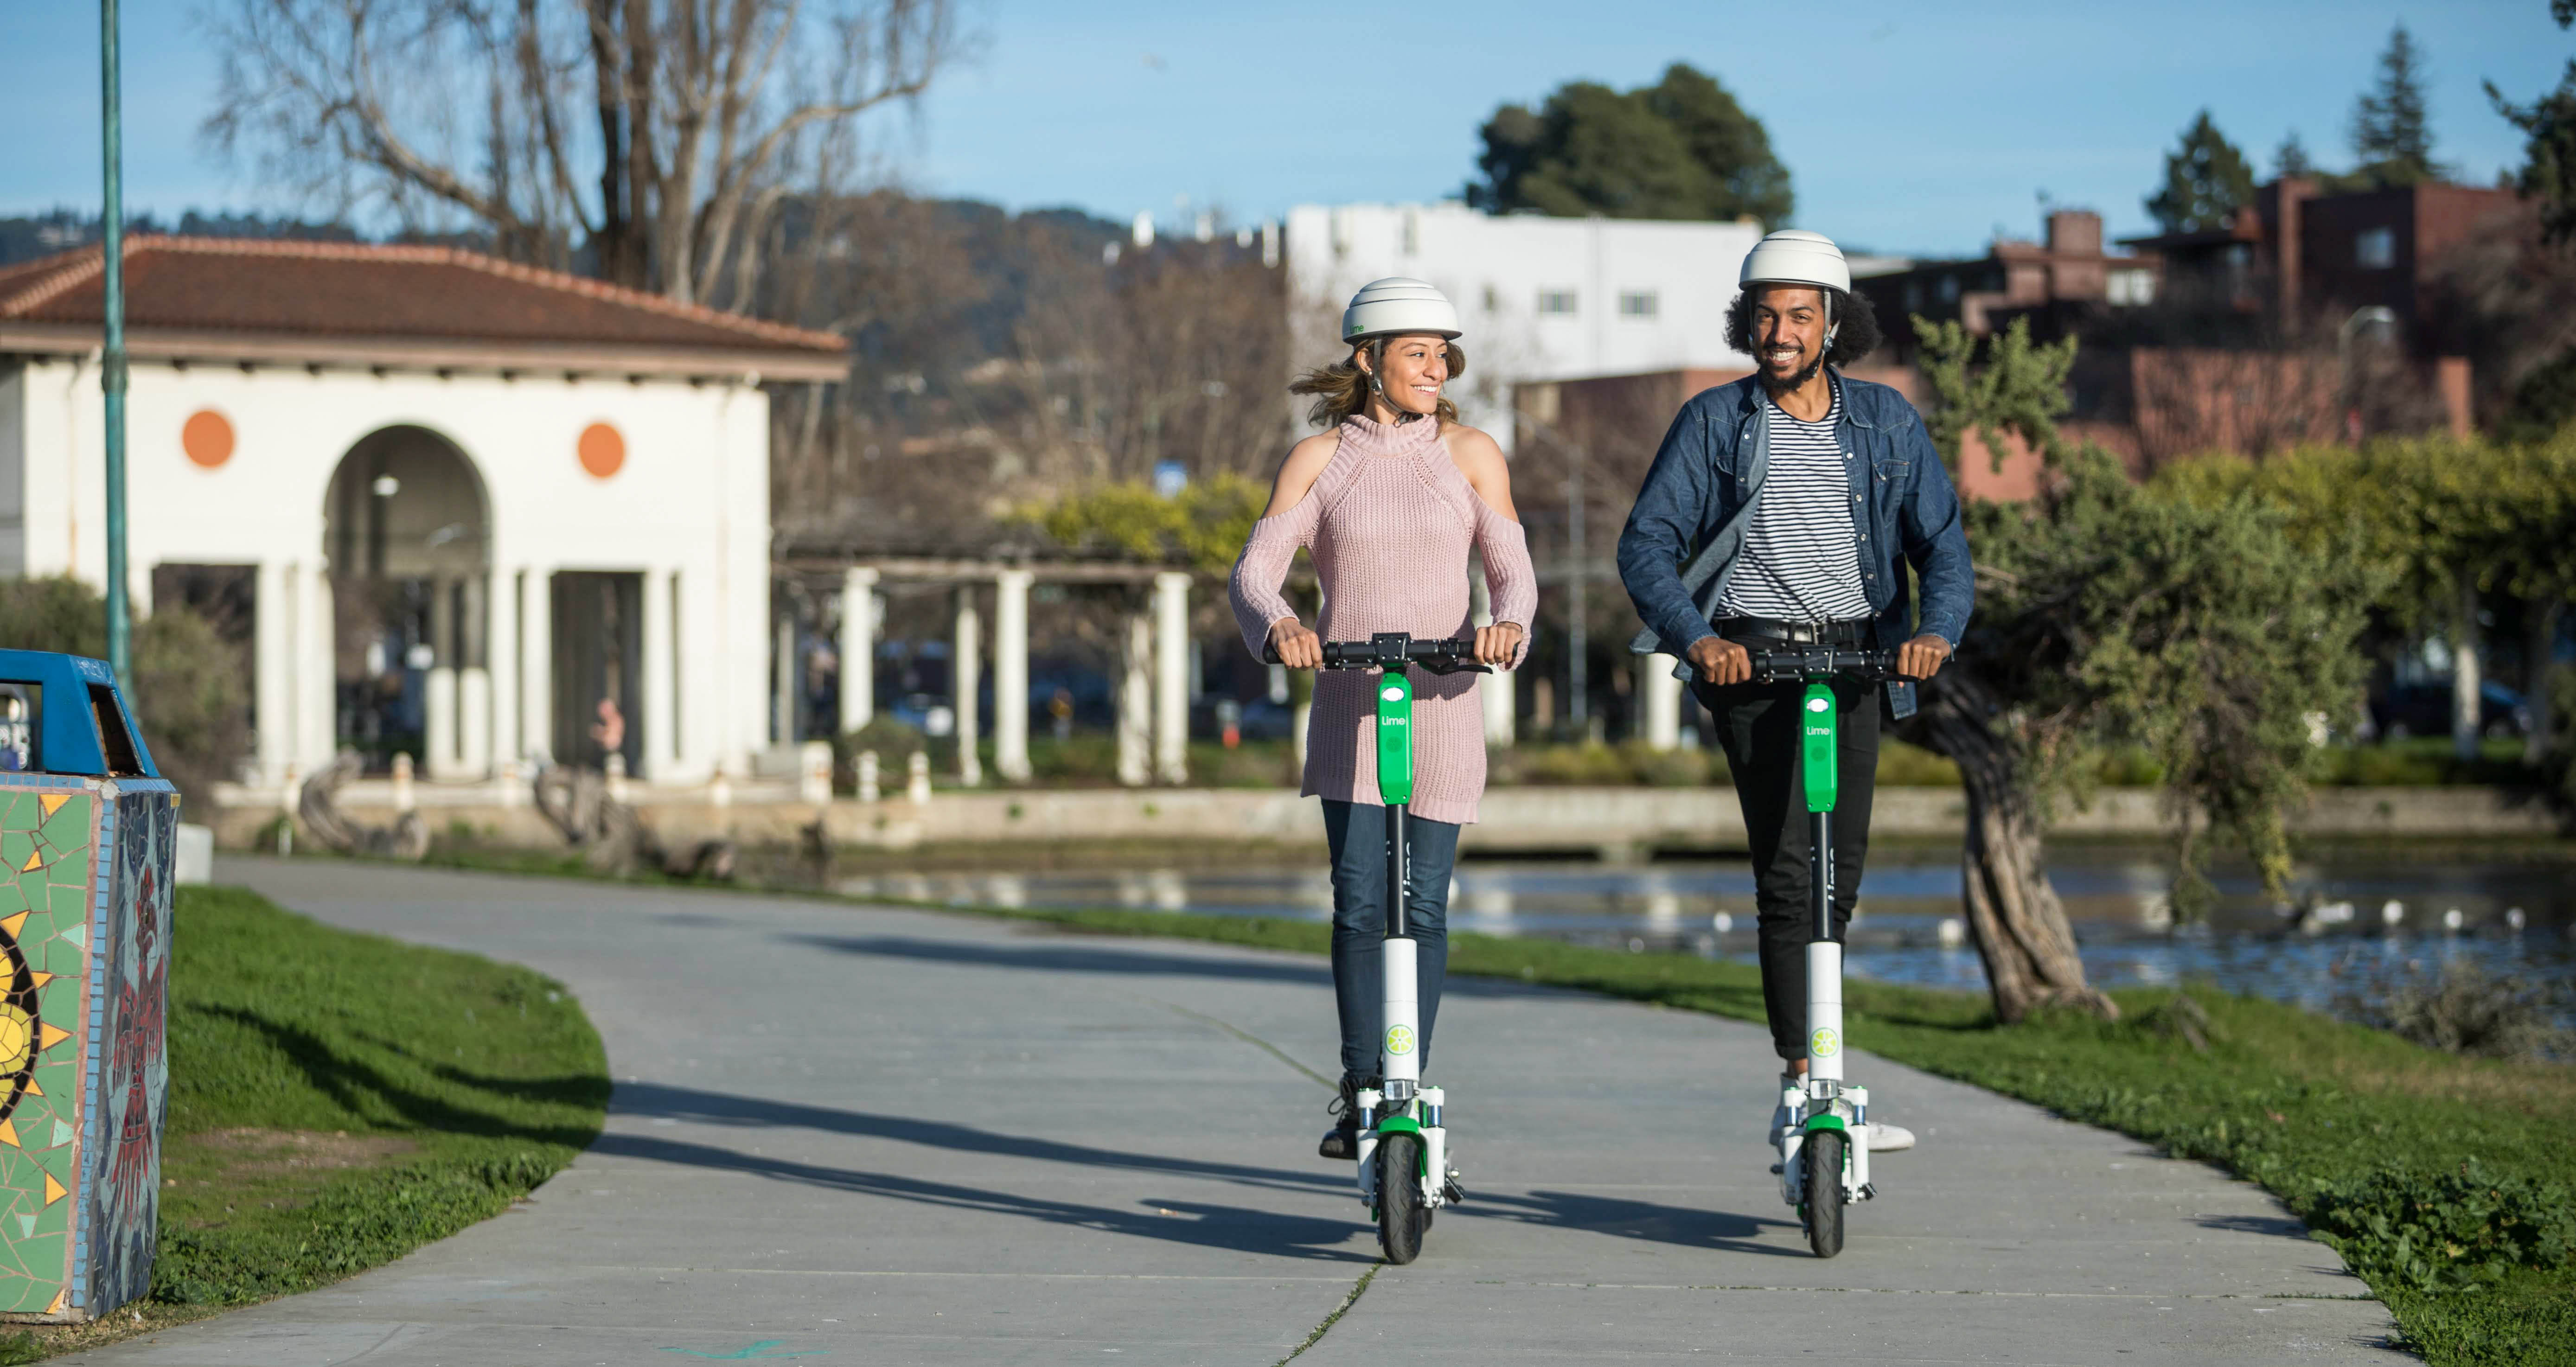 A man and woman, both wearing helmets, each riding their own electronic scooter.